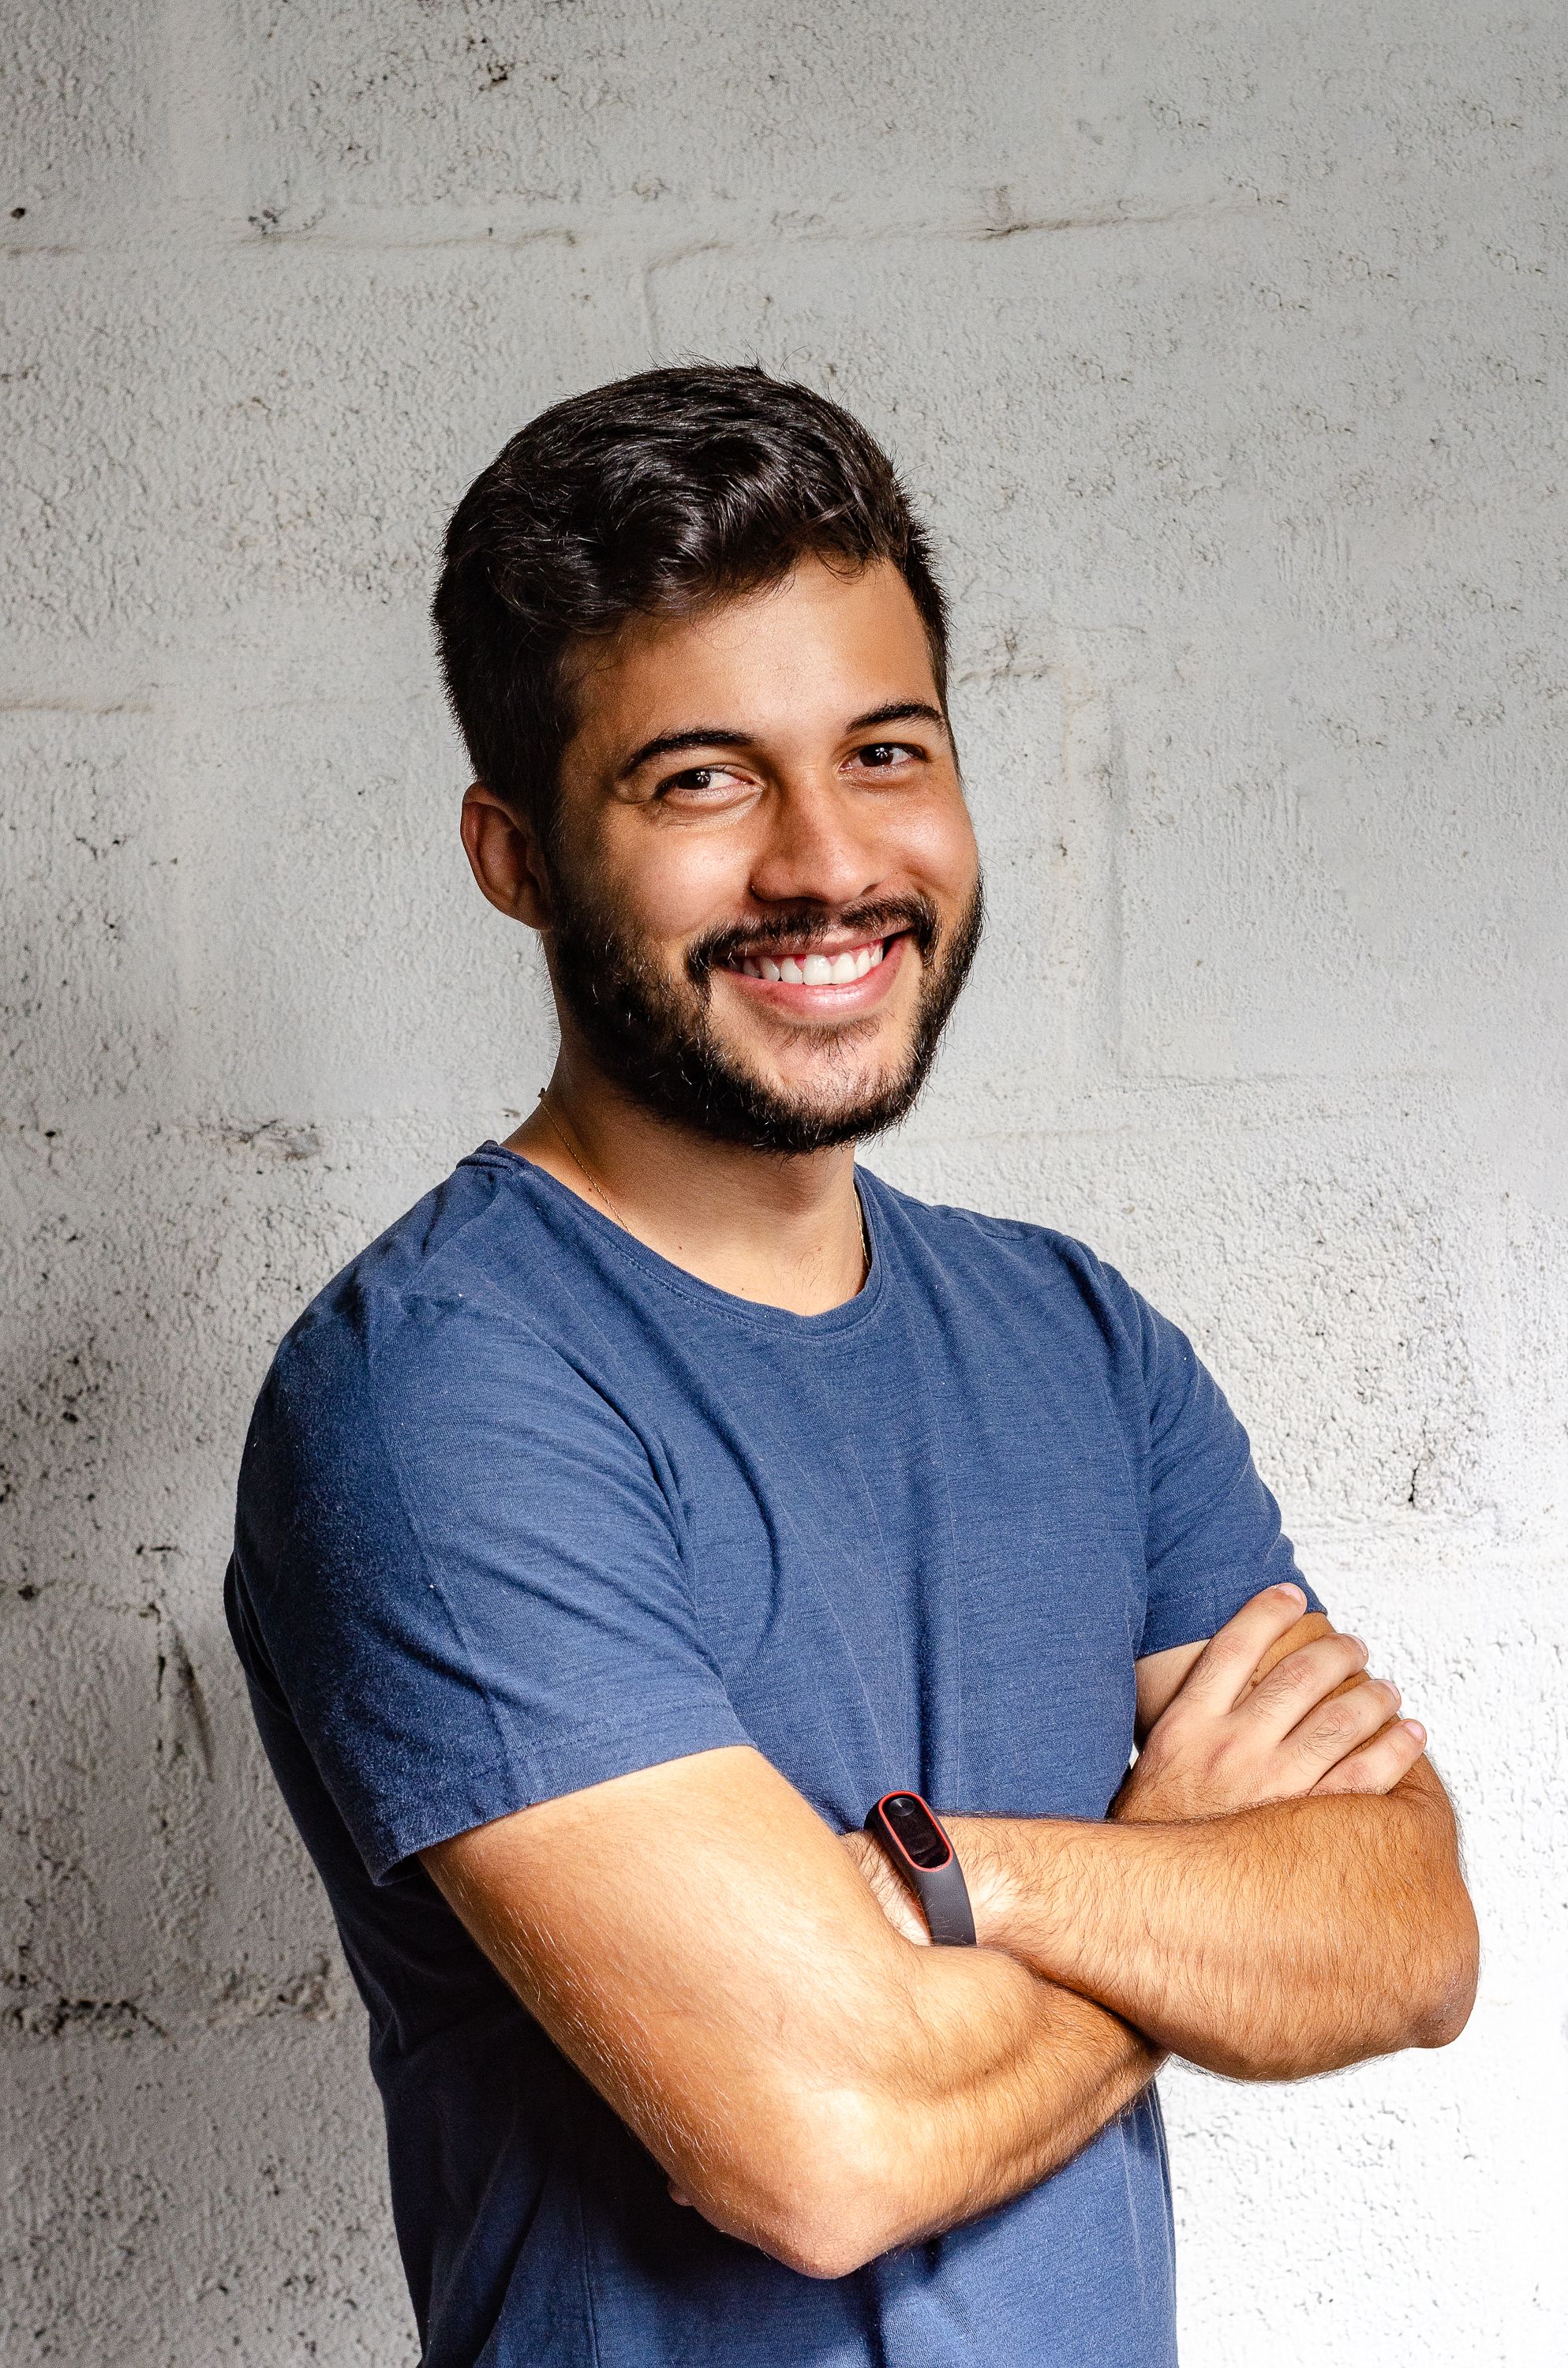 Portrait Photo of Smiling Man with His .pexels.com